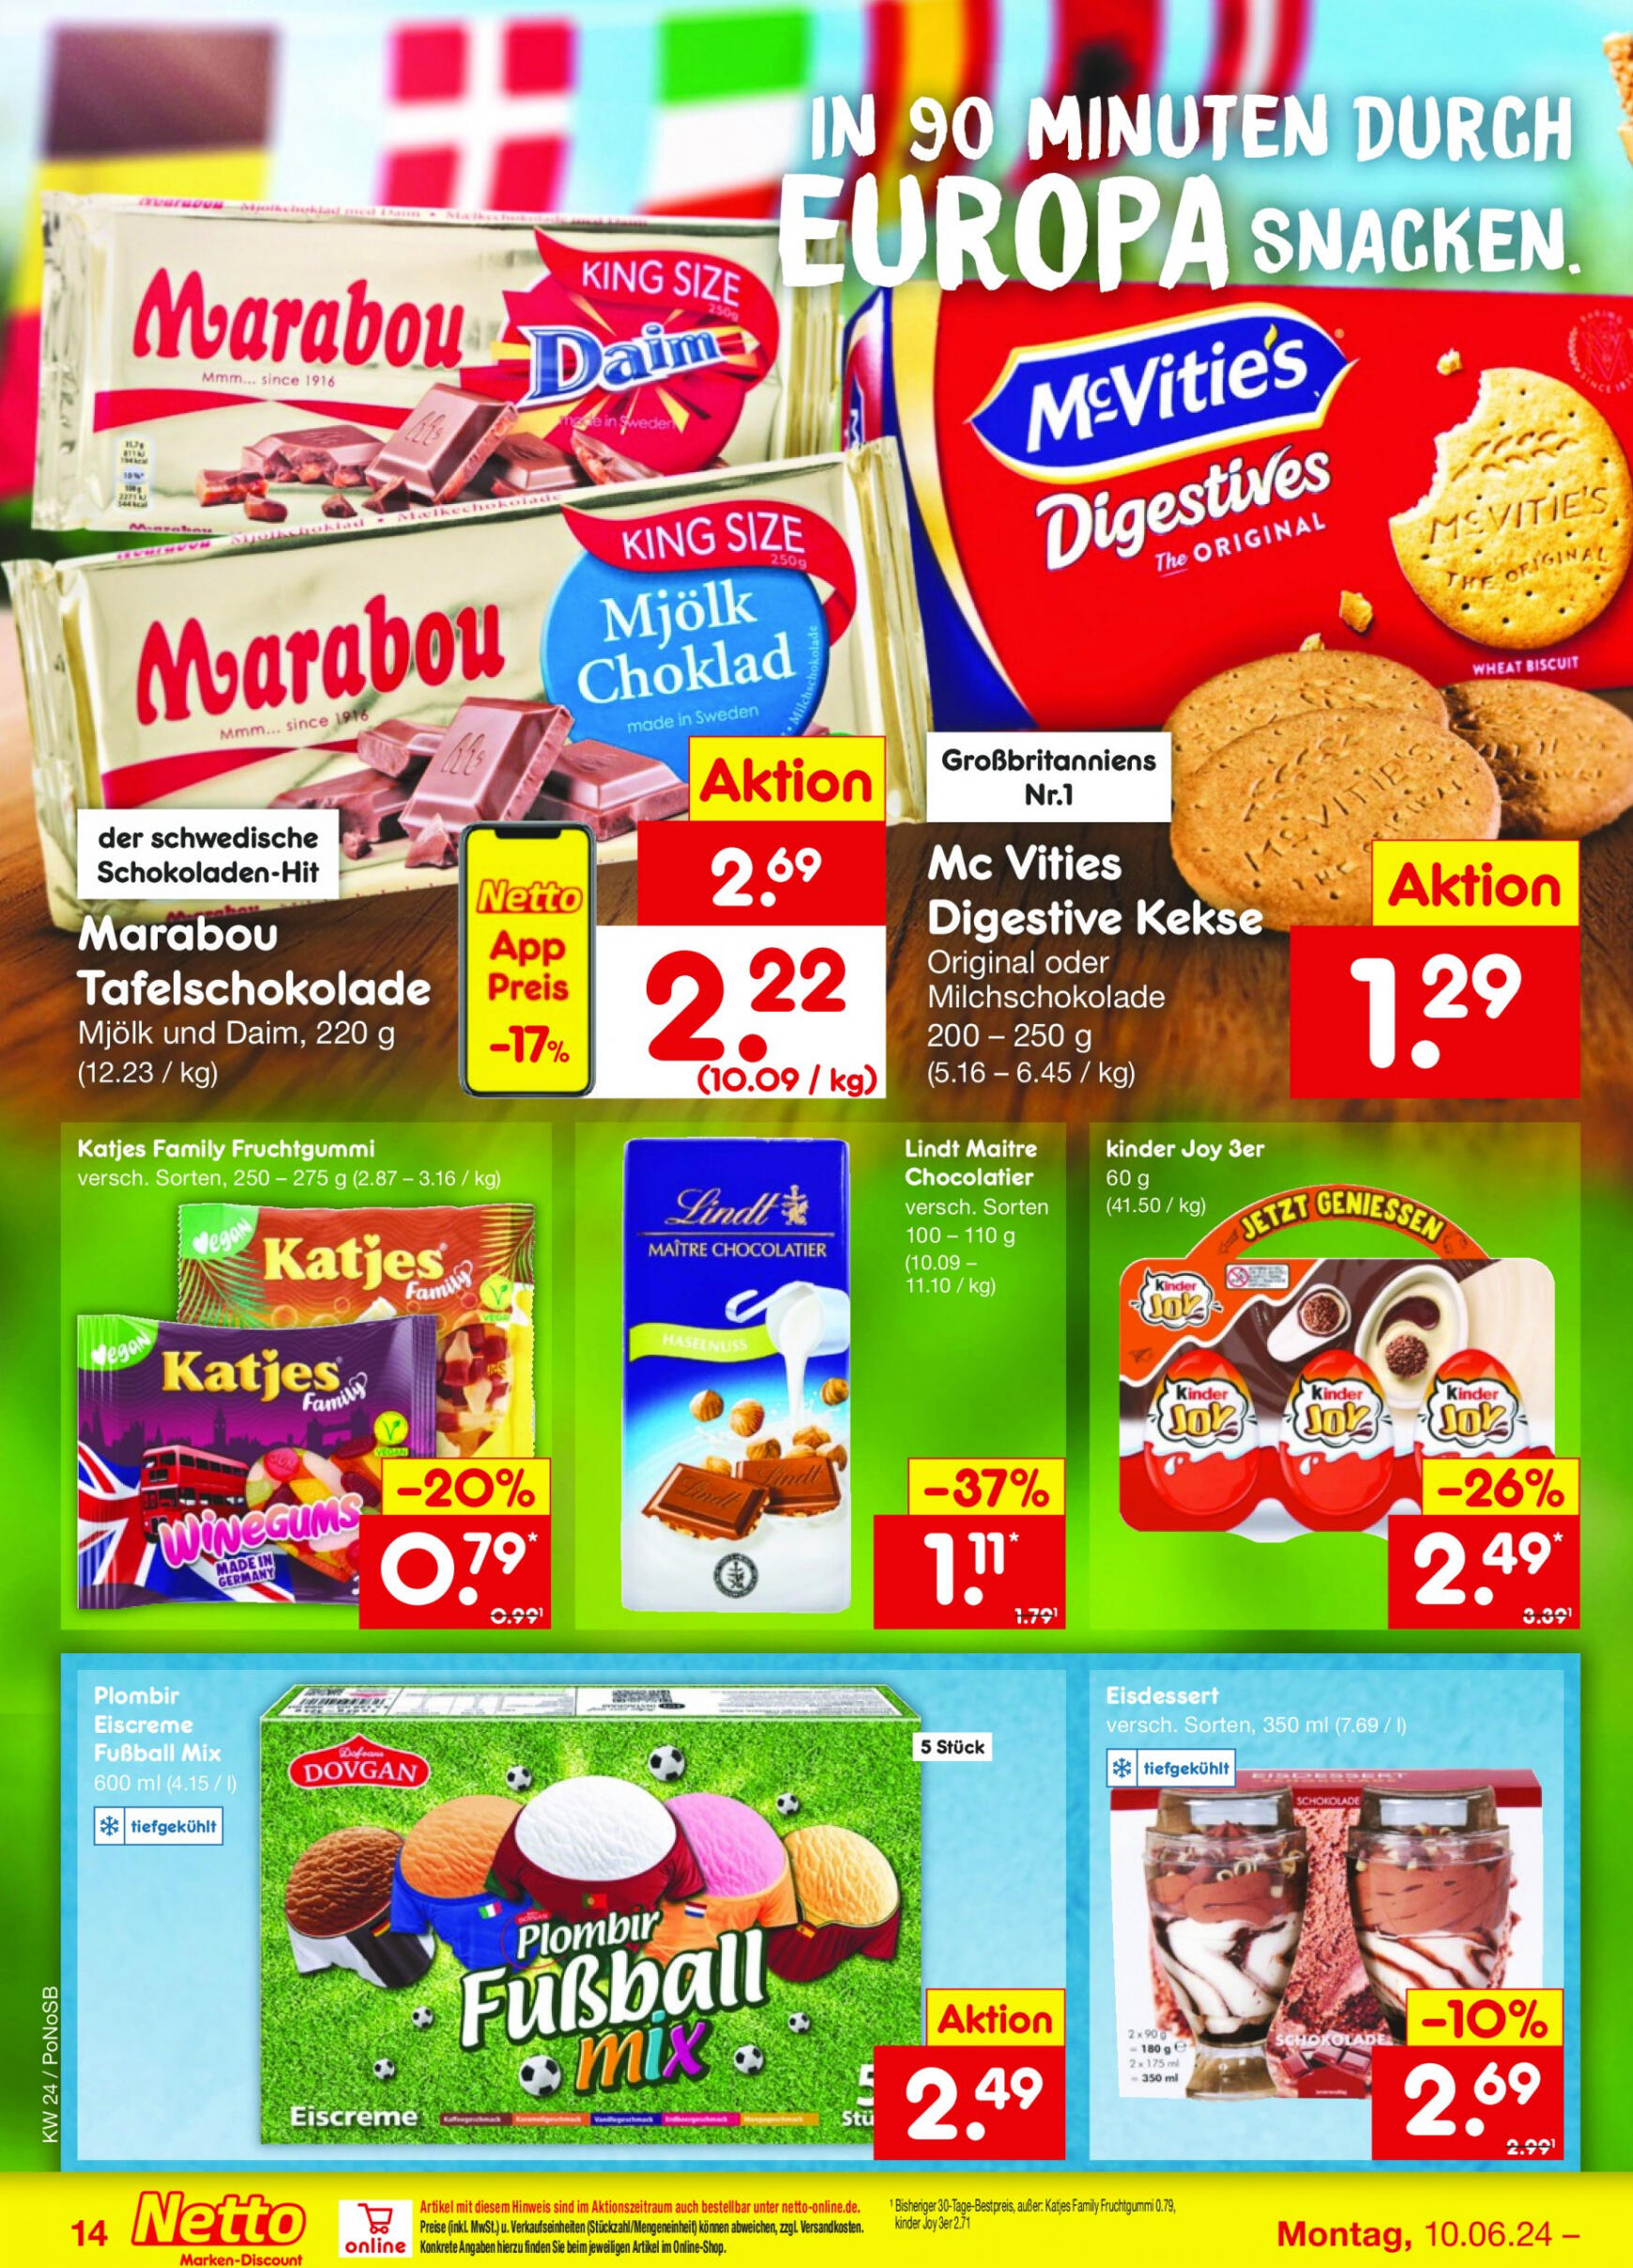 netto - Flyer Netto aktuell 10.06. - 15.06. - page: 16